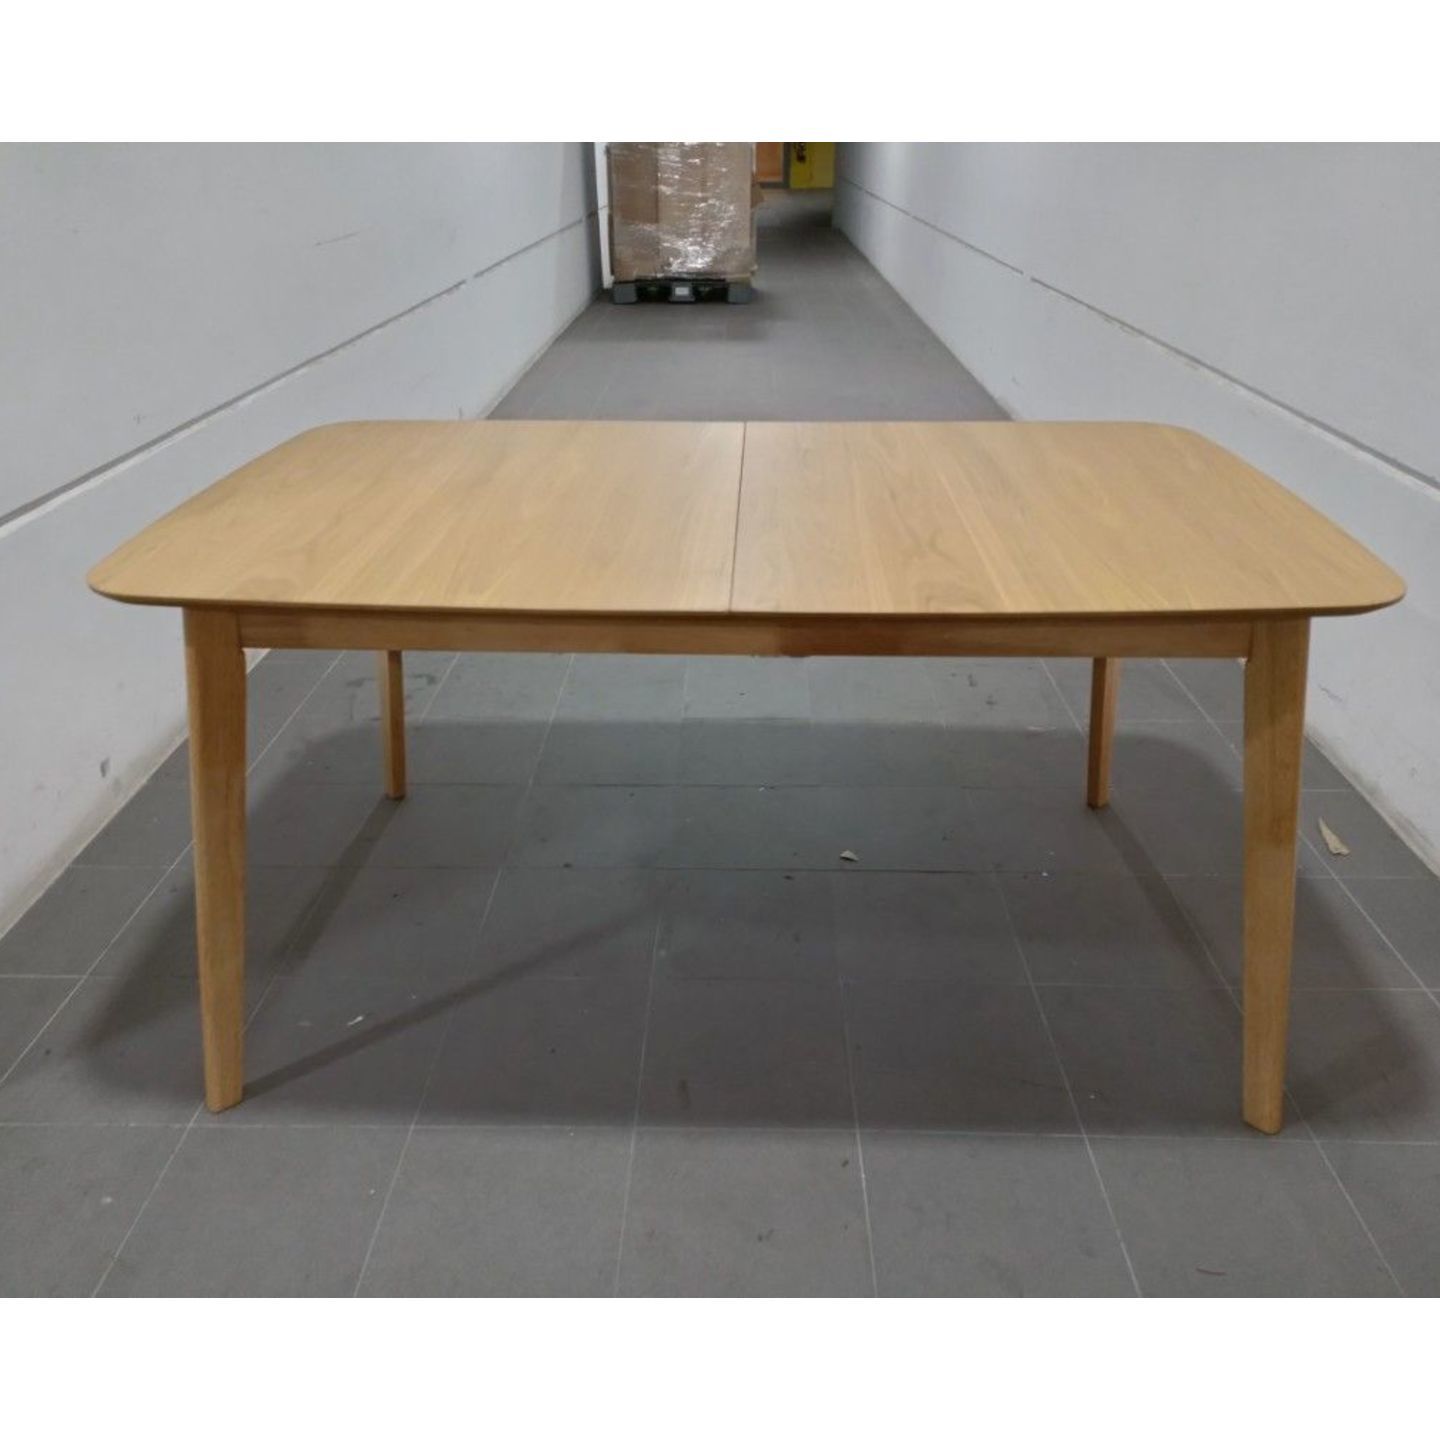 TRAX Extendable Dining Table in OAK